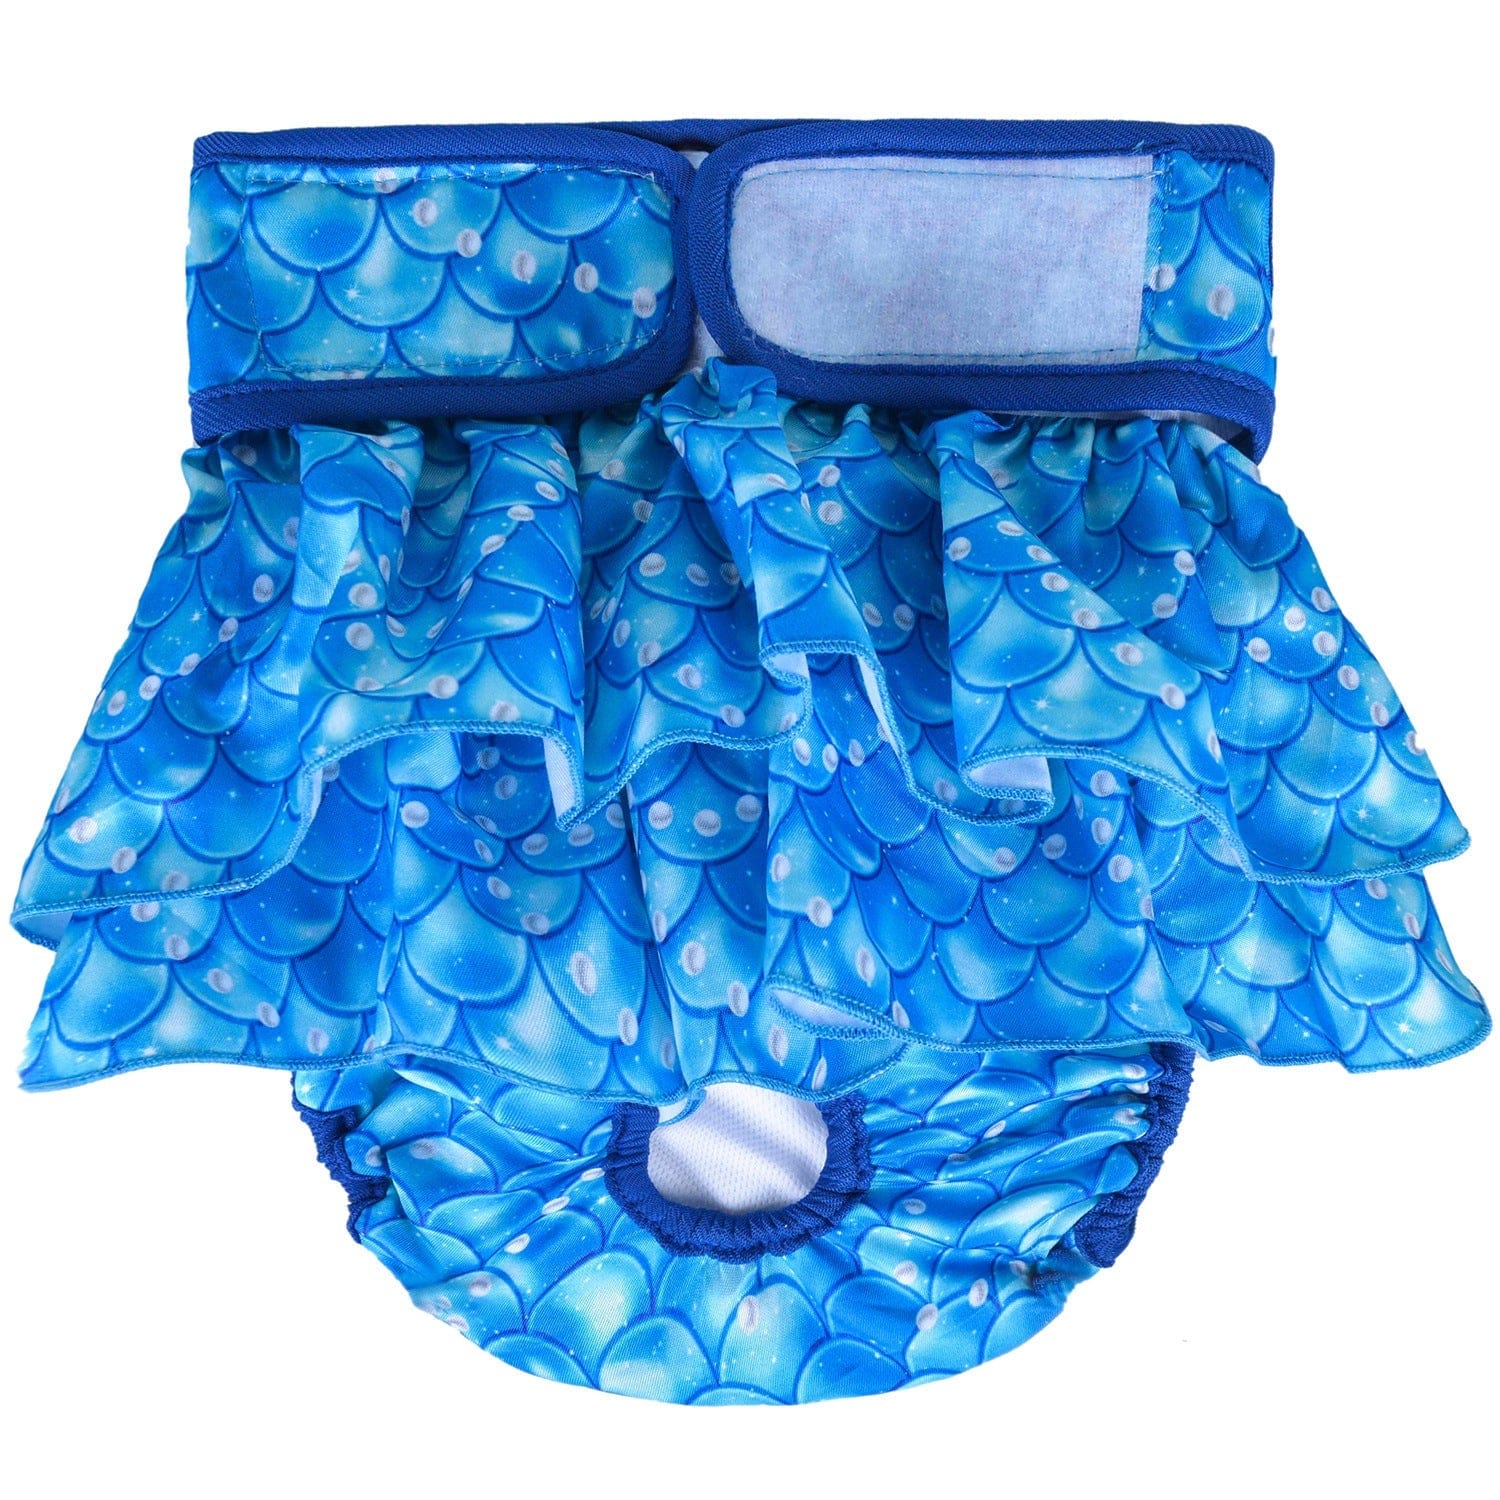 KUTKUT Dog Diapers Female, No Leak Washable Female Dog Diapers, Highly Absorbent Diapers for Dogs Female in Heat, Incontinence, Excitable Urination or Period Reusable Dog Skirt Diapers (Blue)-Diapers-kutkutstyle